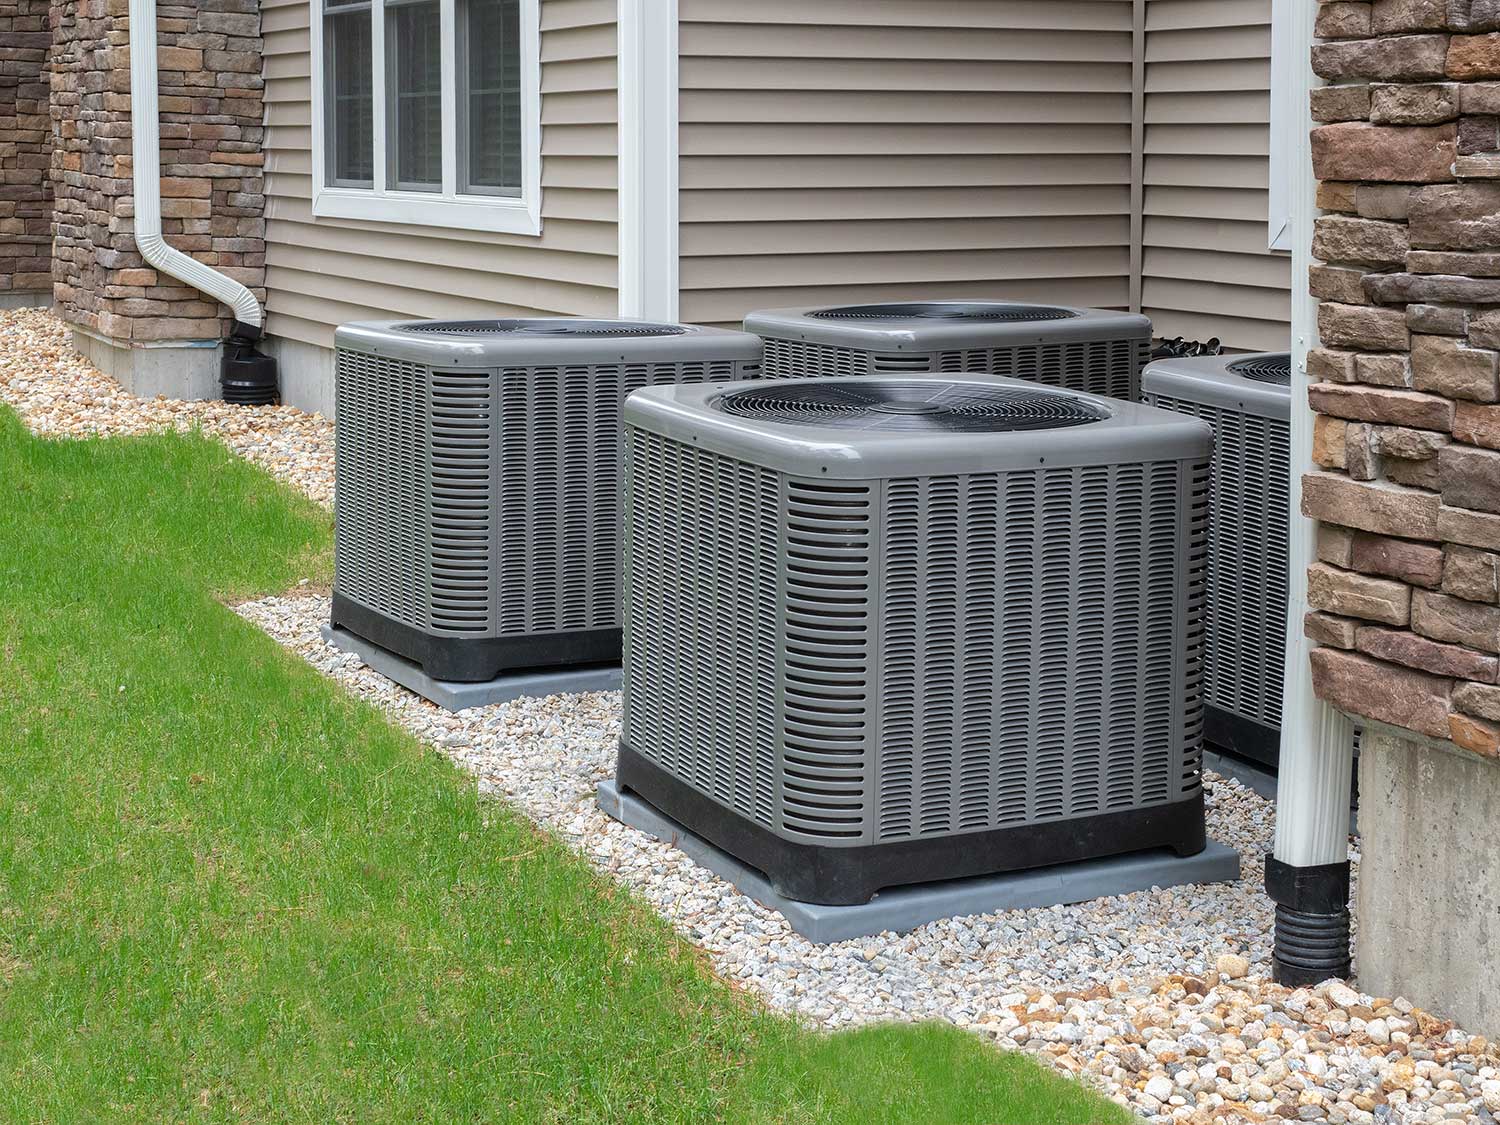 Some deciding factors when installing a brand new Heating, Ventilation plus A/C system into your home